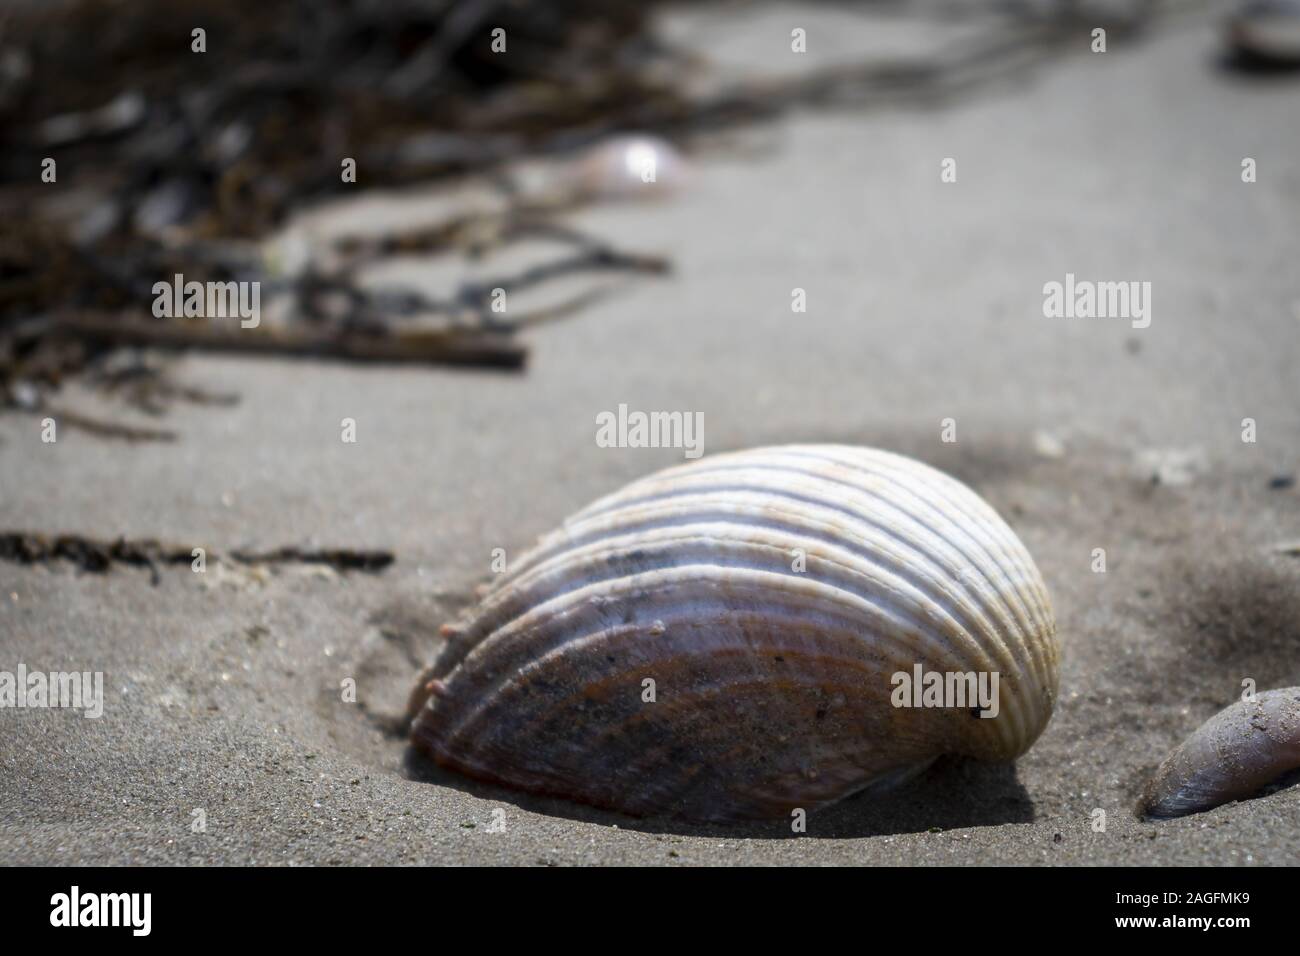 Closeup of a cockle on the beach surrounded by branches with a blurry background Stock Photo